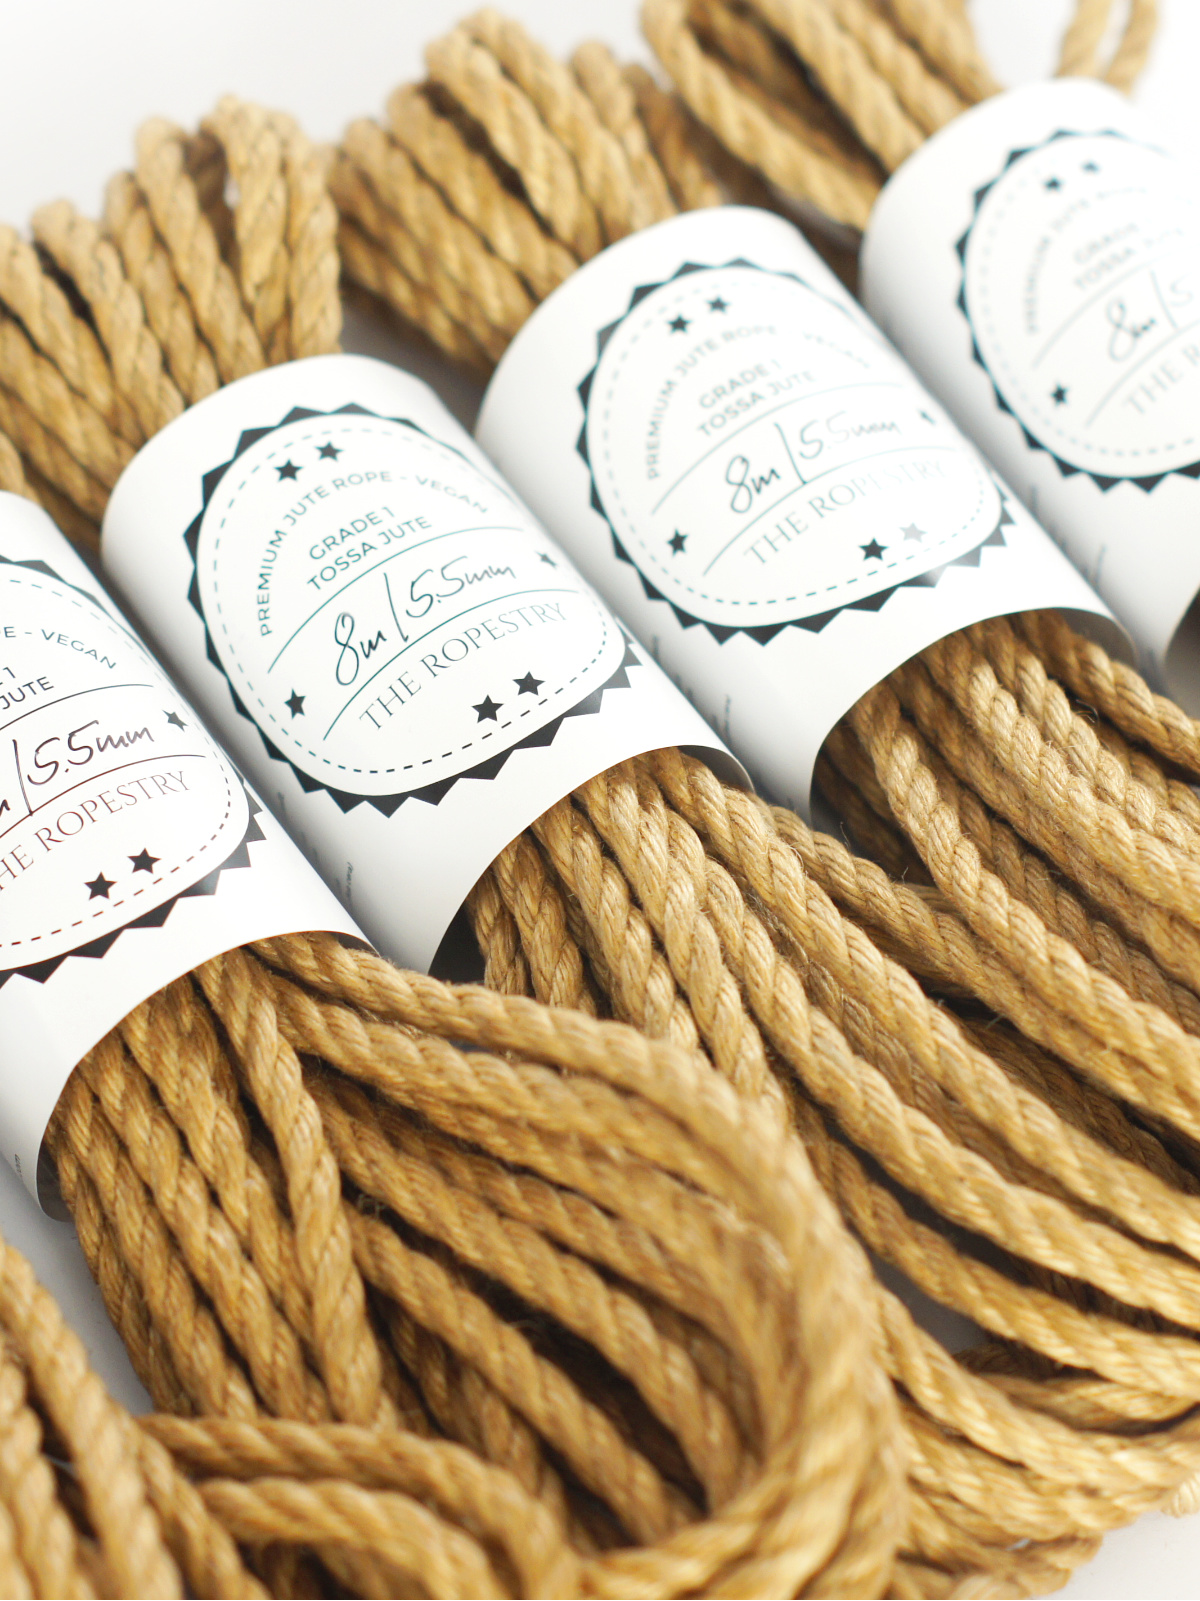 B-STOCK 5pc set, ∅ 5.5mm, 8m, jute rope, ready for use